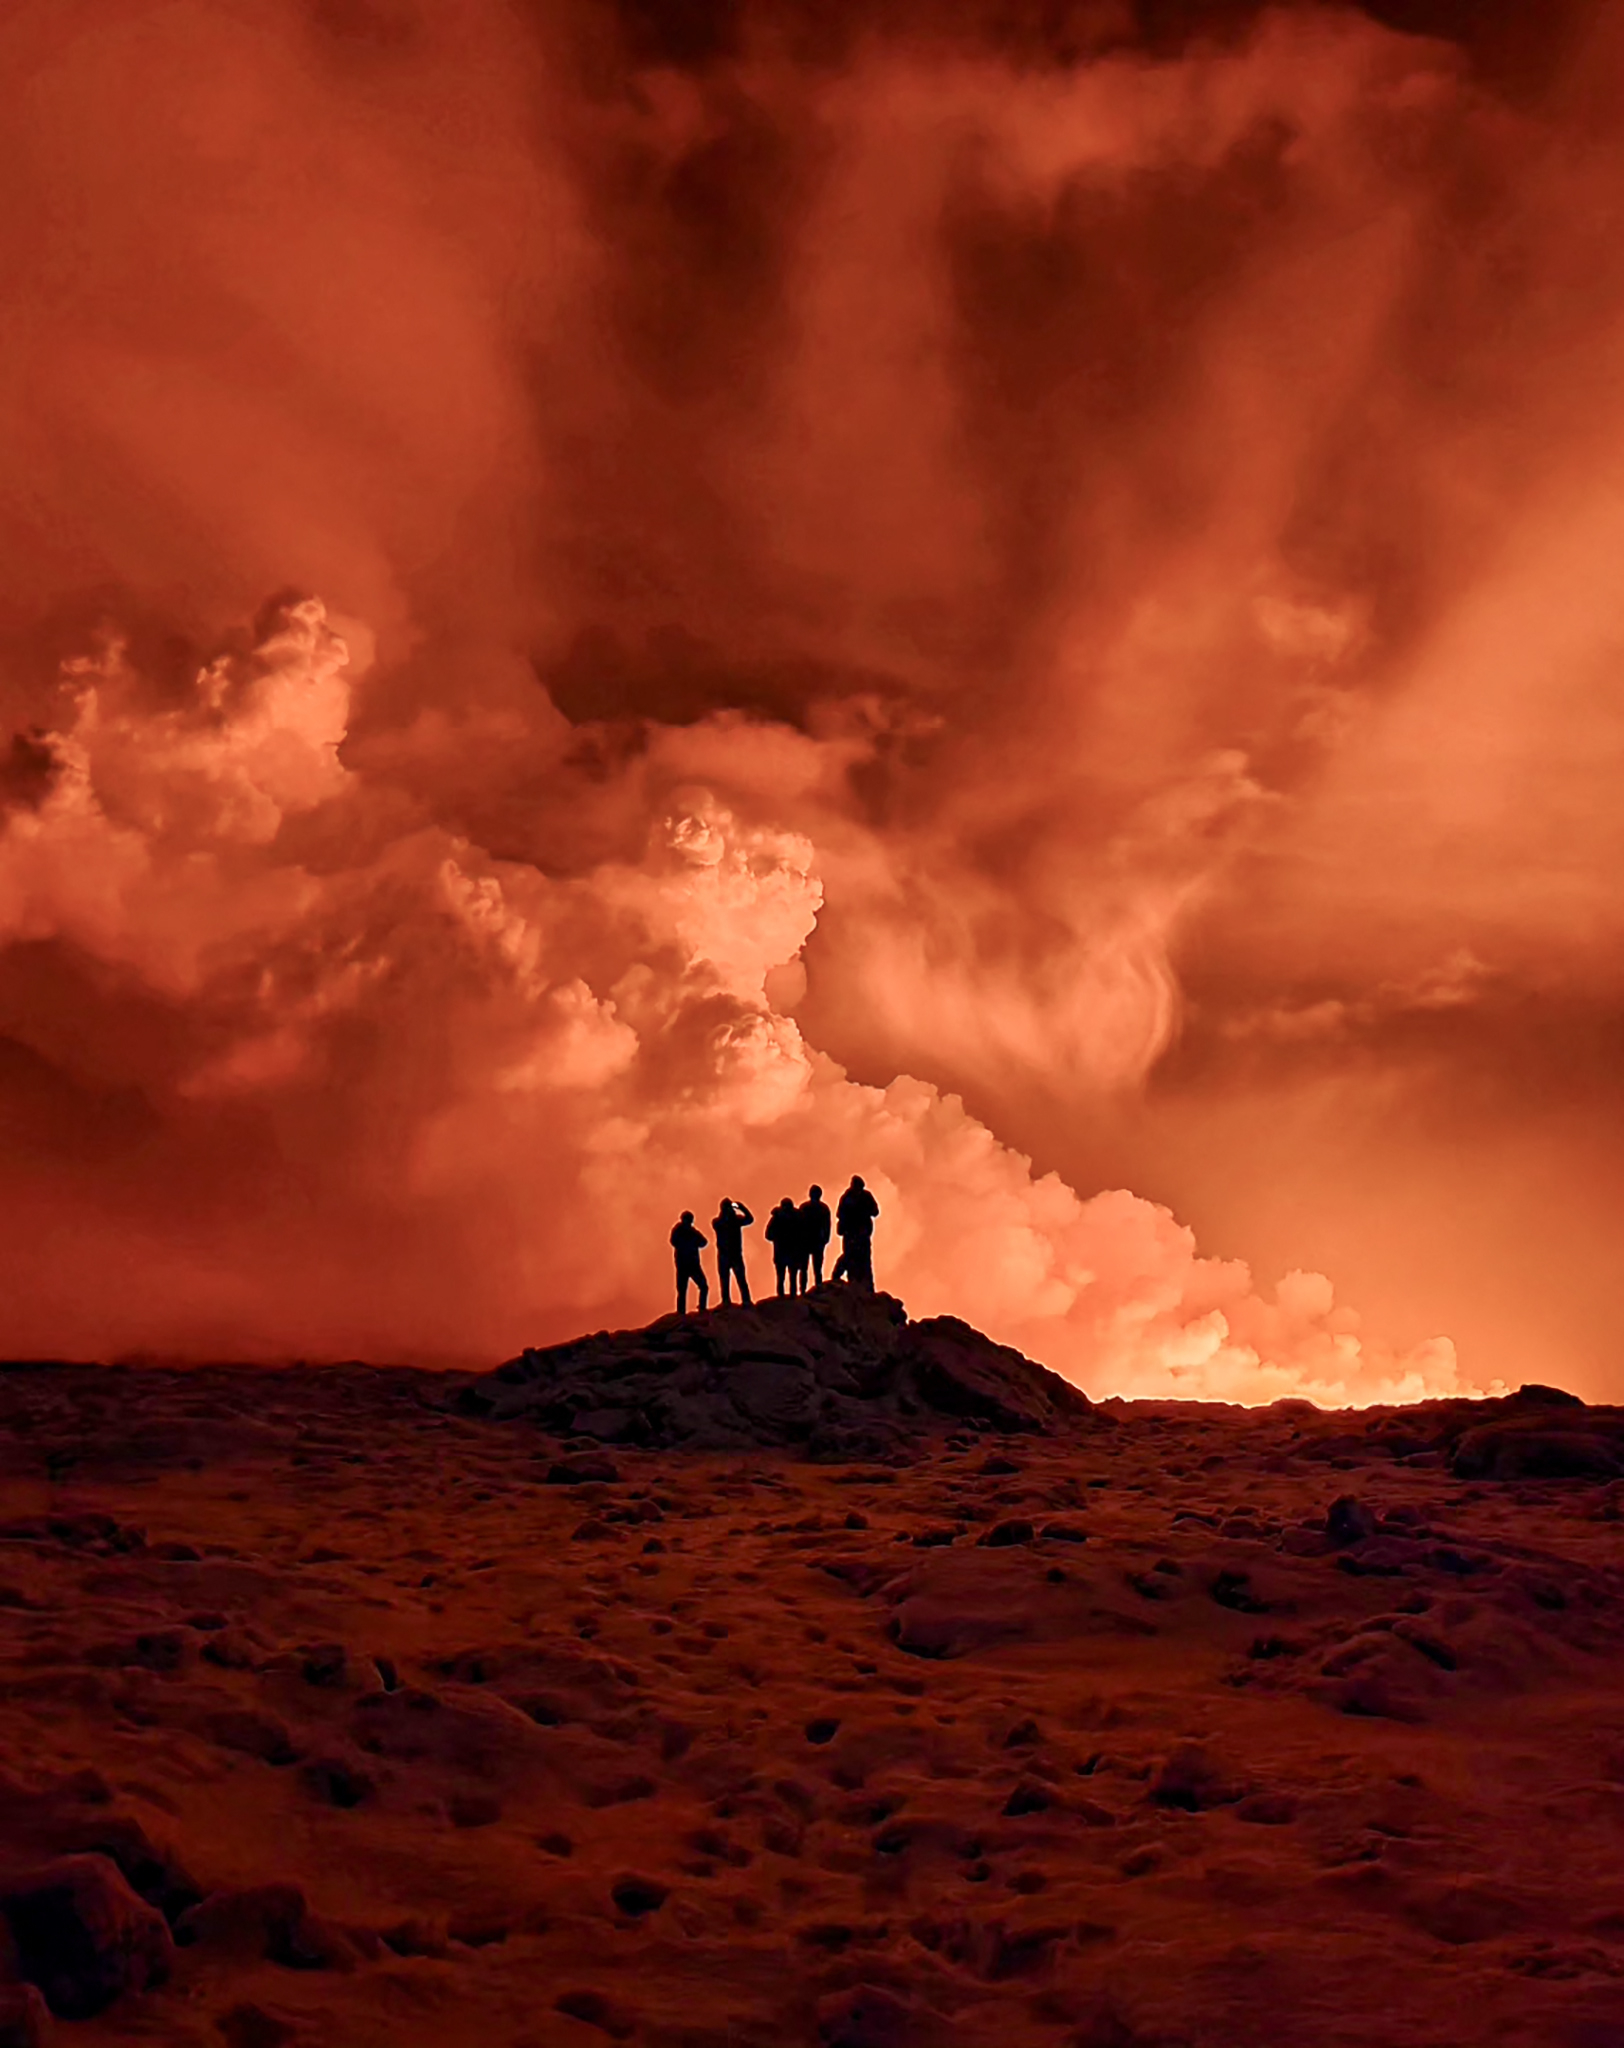 Silhouettes of people against the volcanic smoke